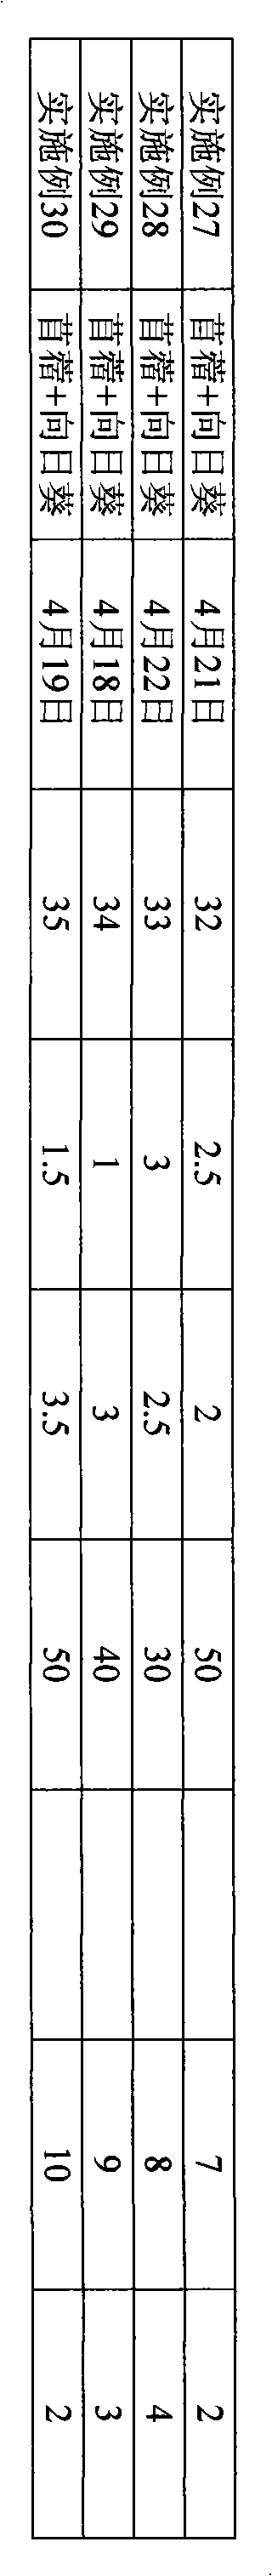 Method for replacing flaveria bidentis by utilizing combination of sunflower and alfalfa